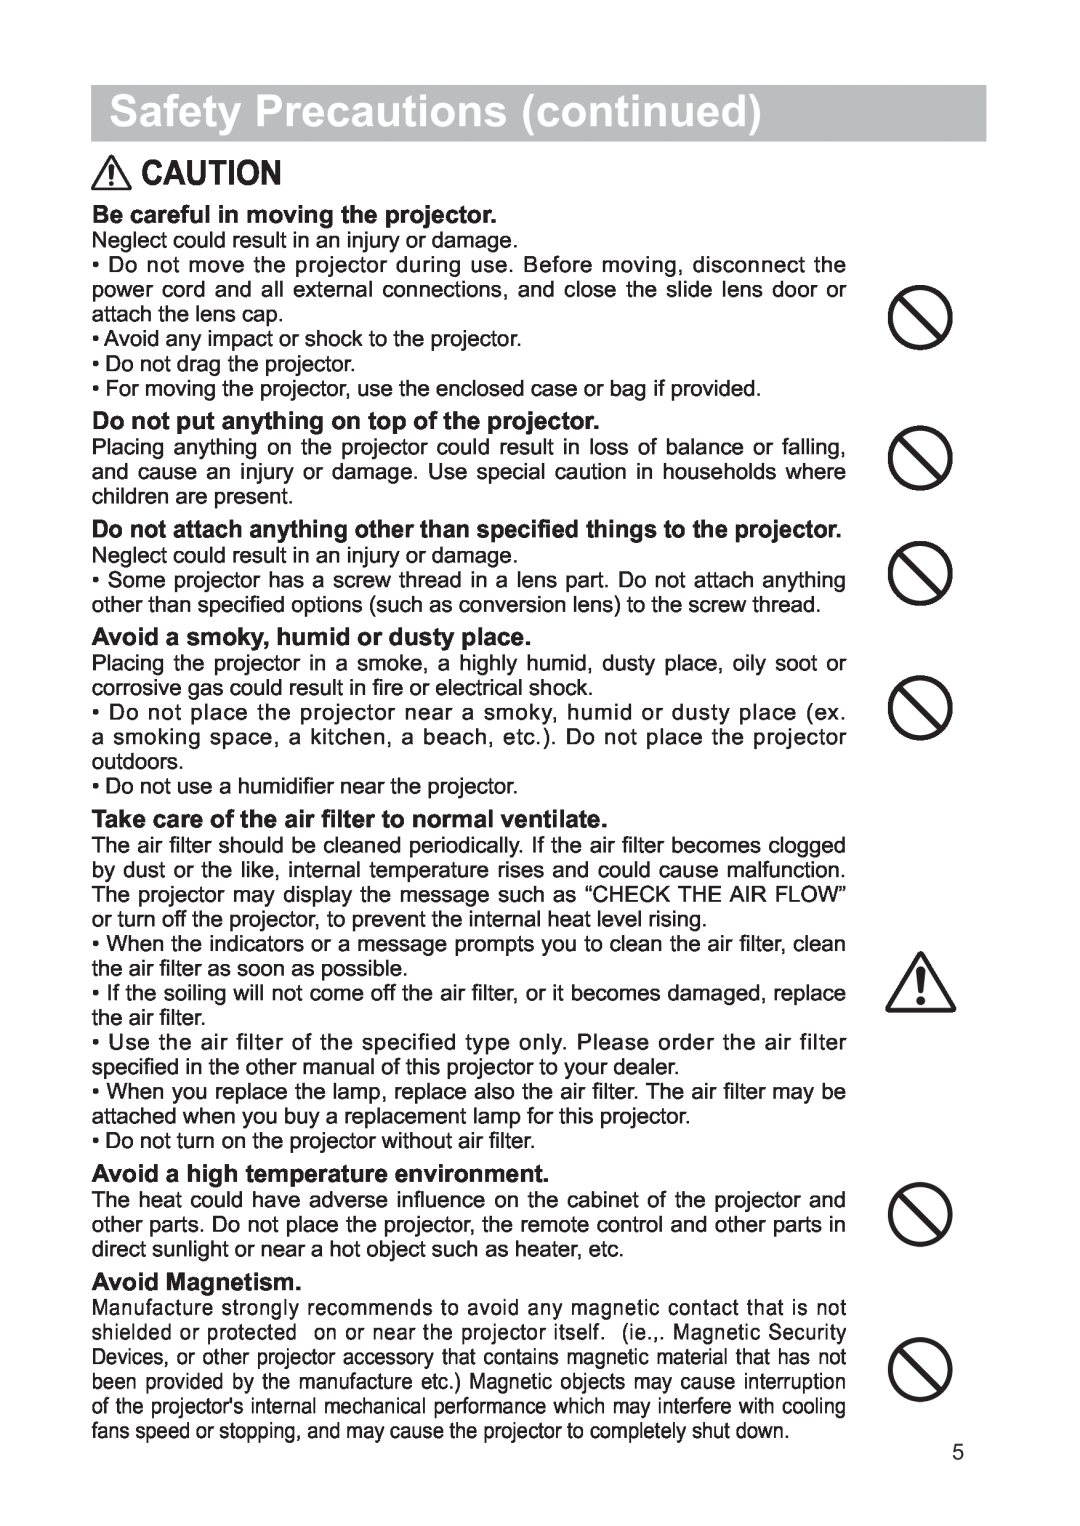 Hitachi ED-X32 user manual Be careful in moving the projector, Do not put anything on top of the projector, Avoid Magnetism 